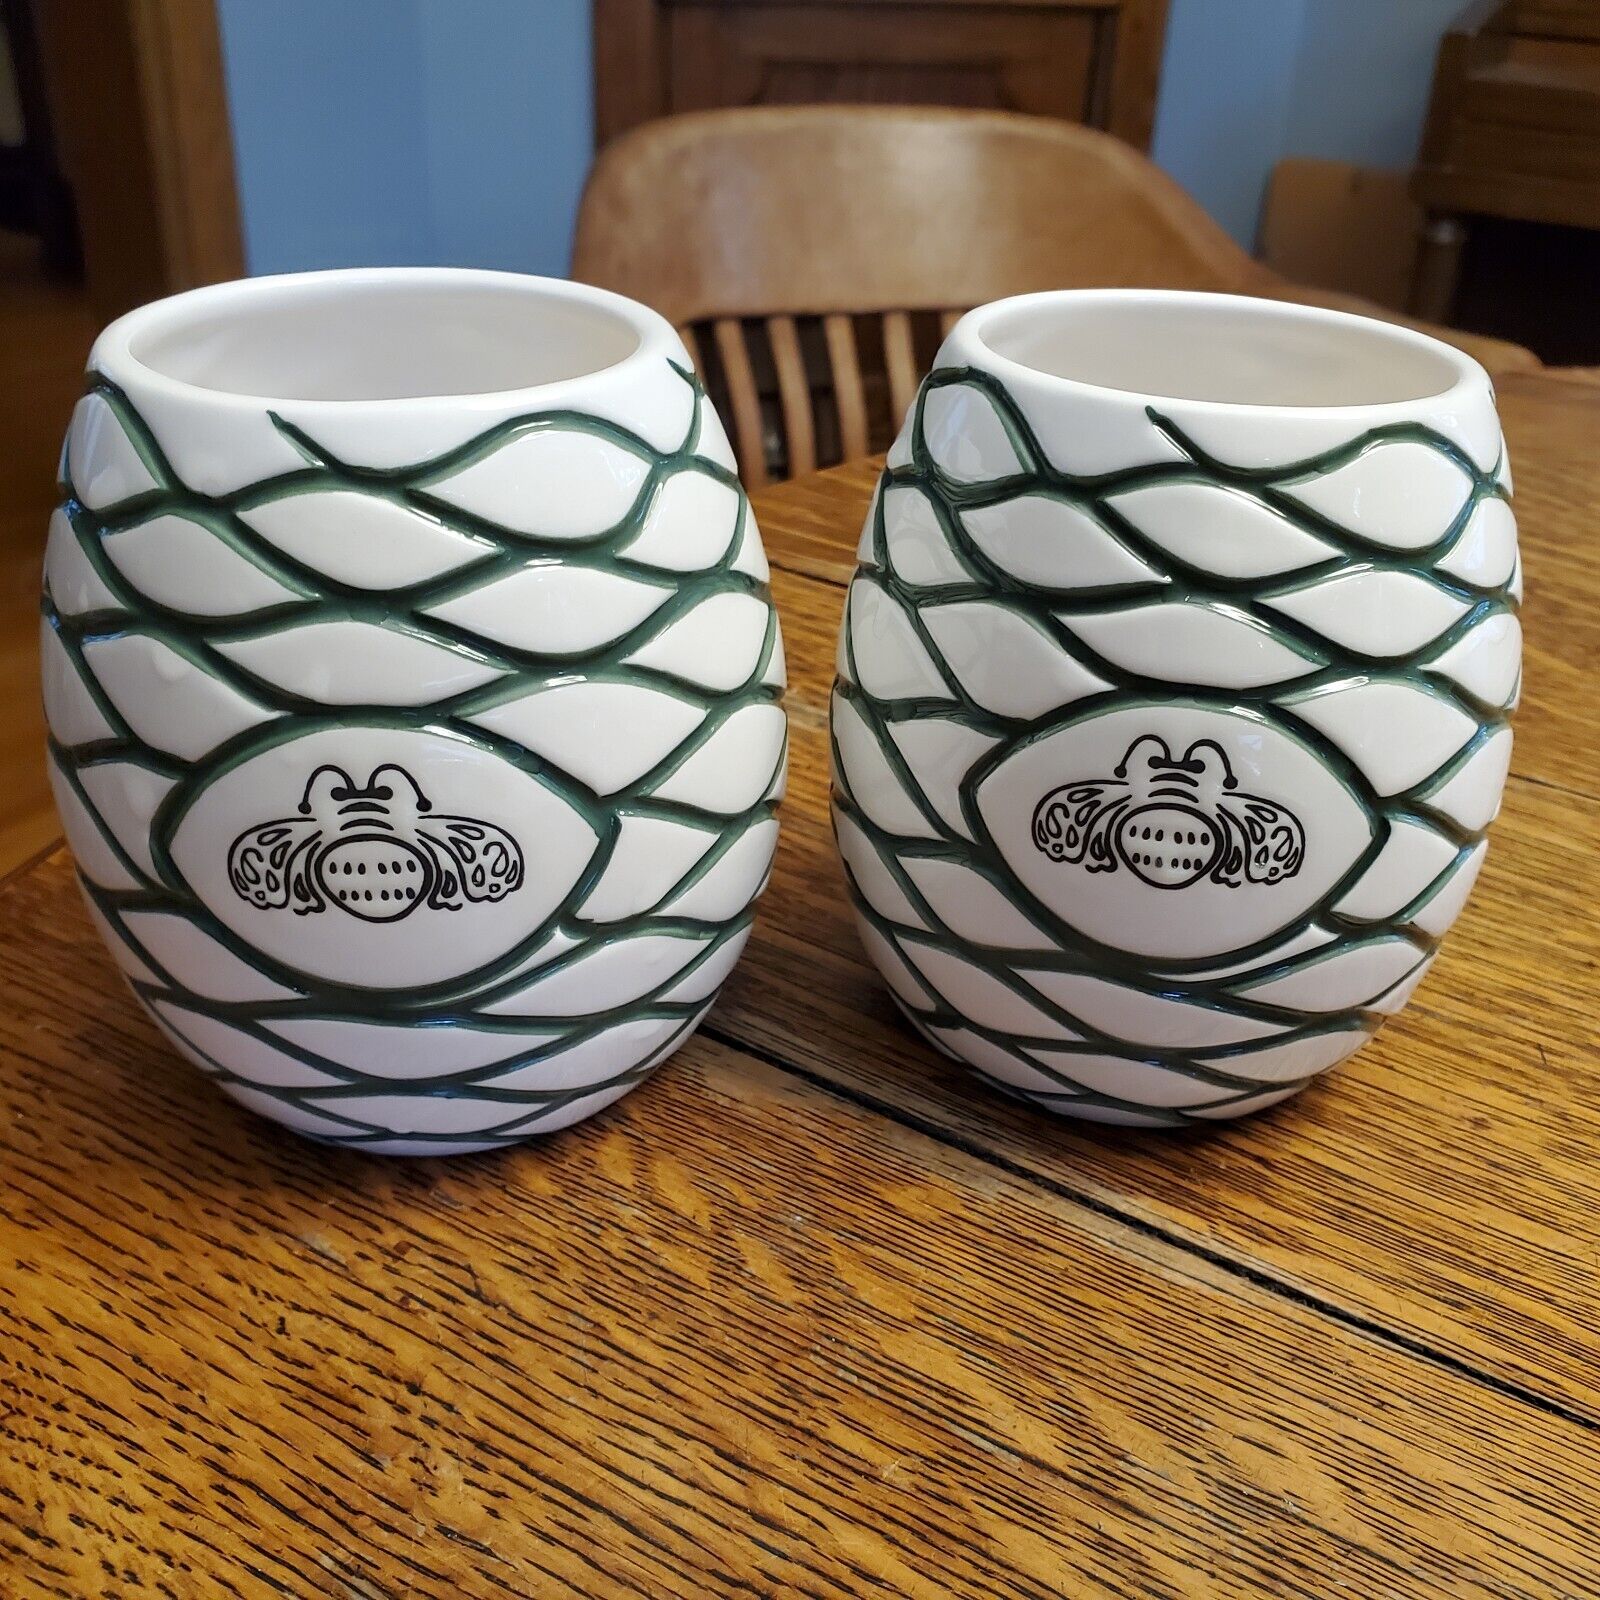 (2) Patron Tequila Tiki Mug Agave Cup Authentic Bee Cup Limited Edition -New